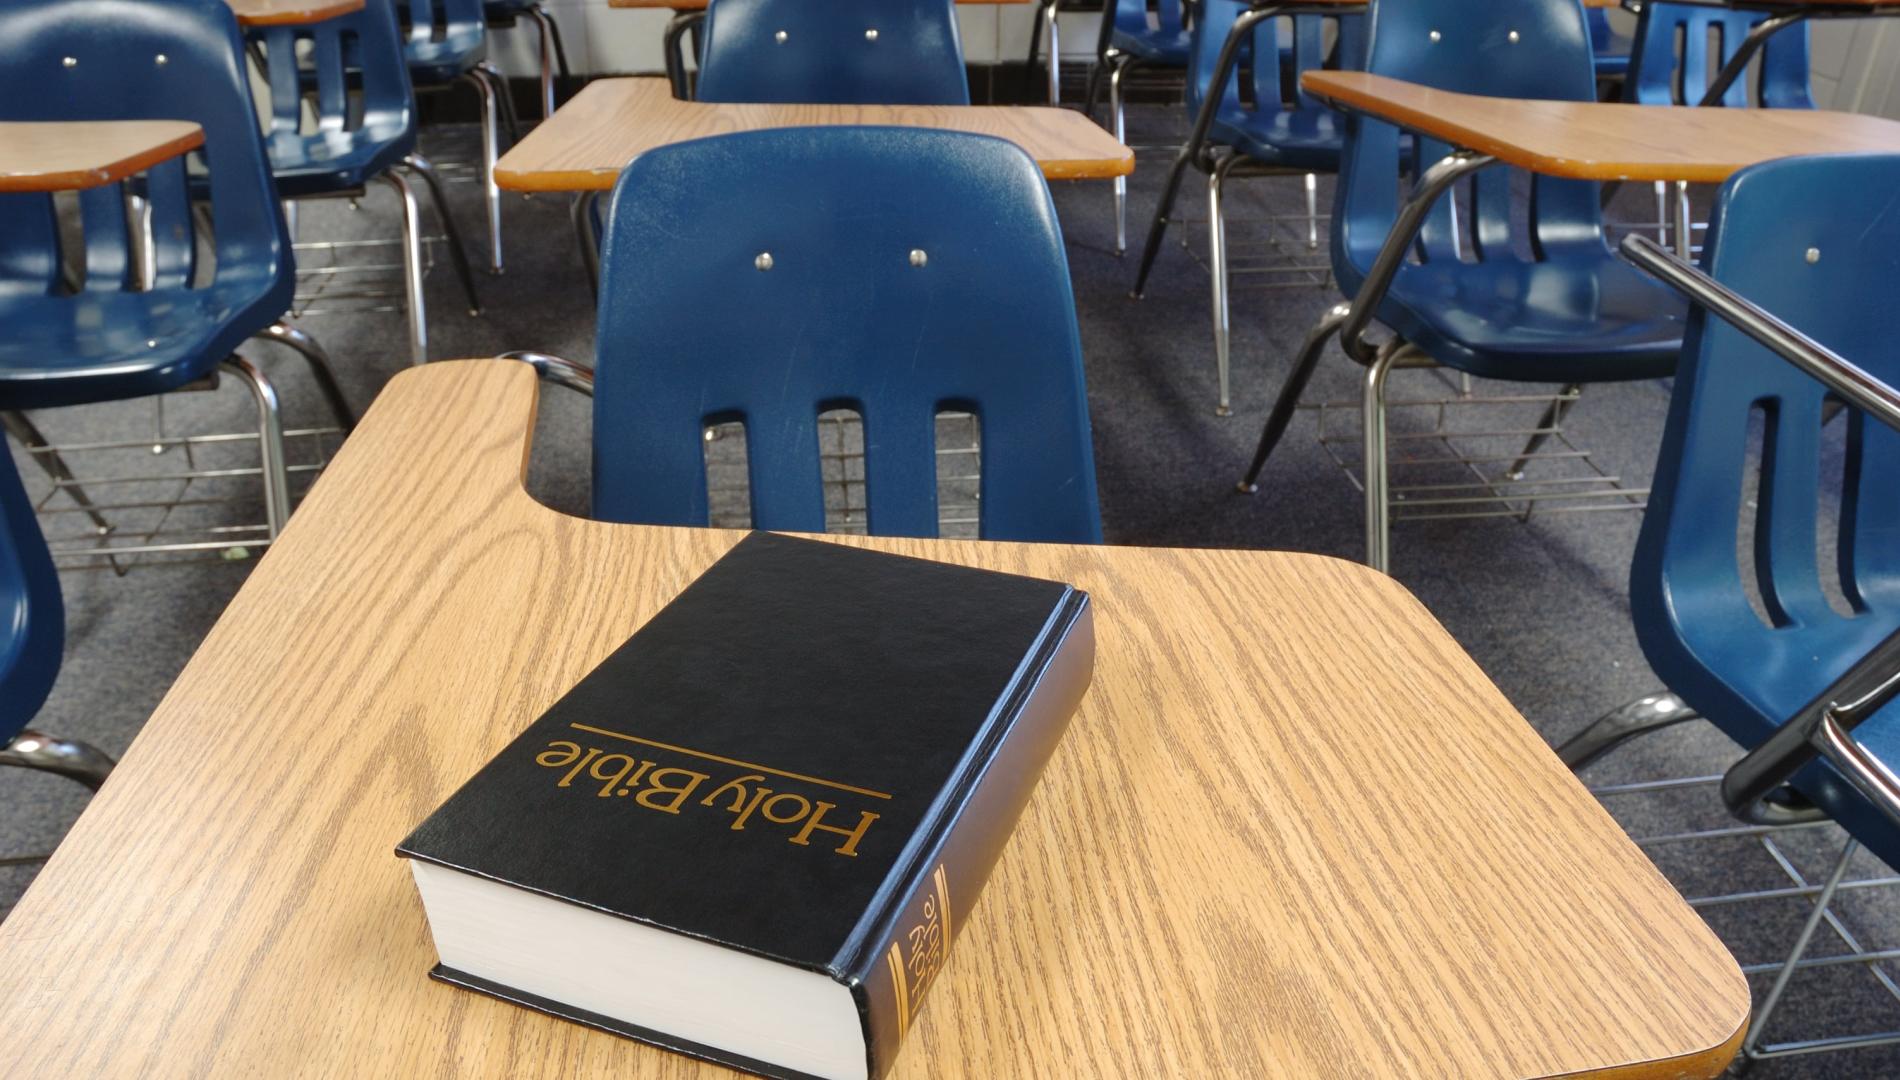 A copy of The Holy Bible on a desk in an empty classroom